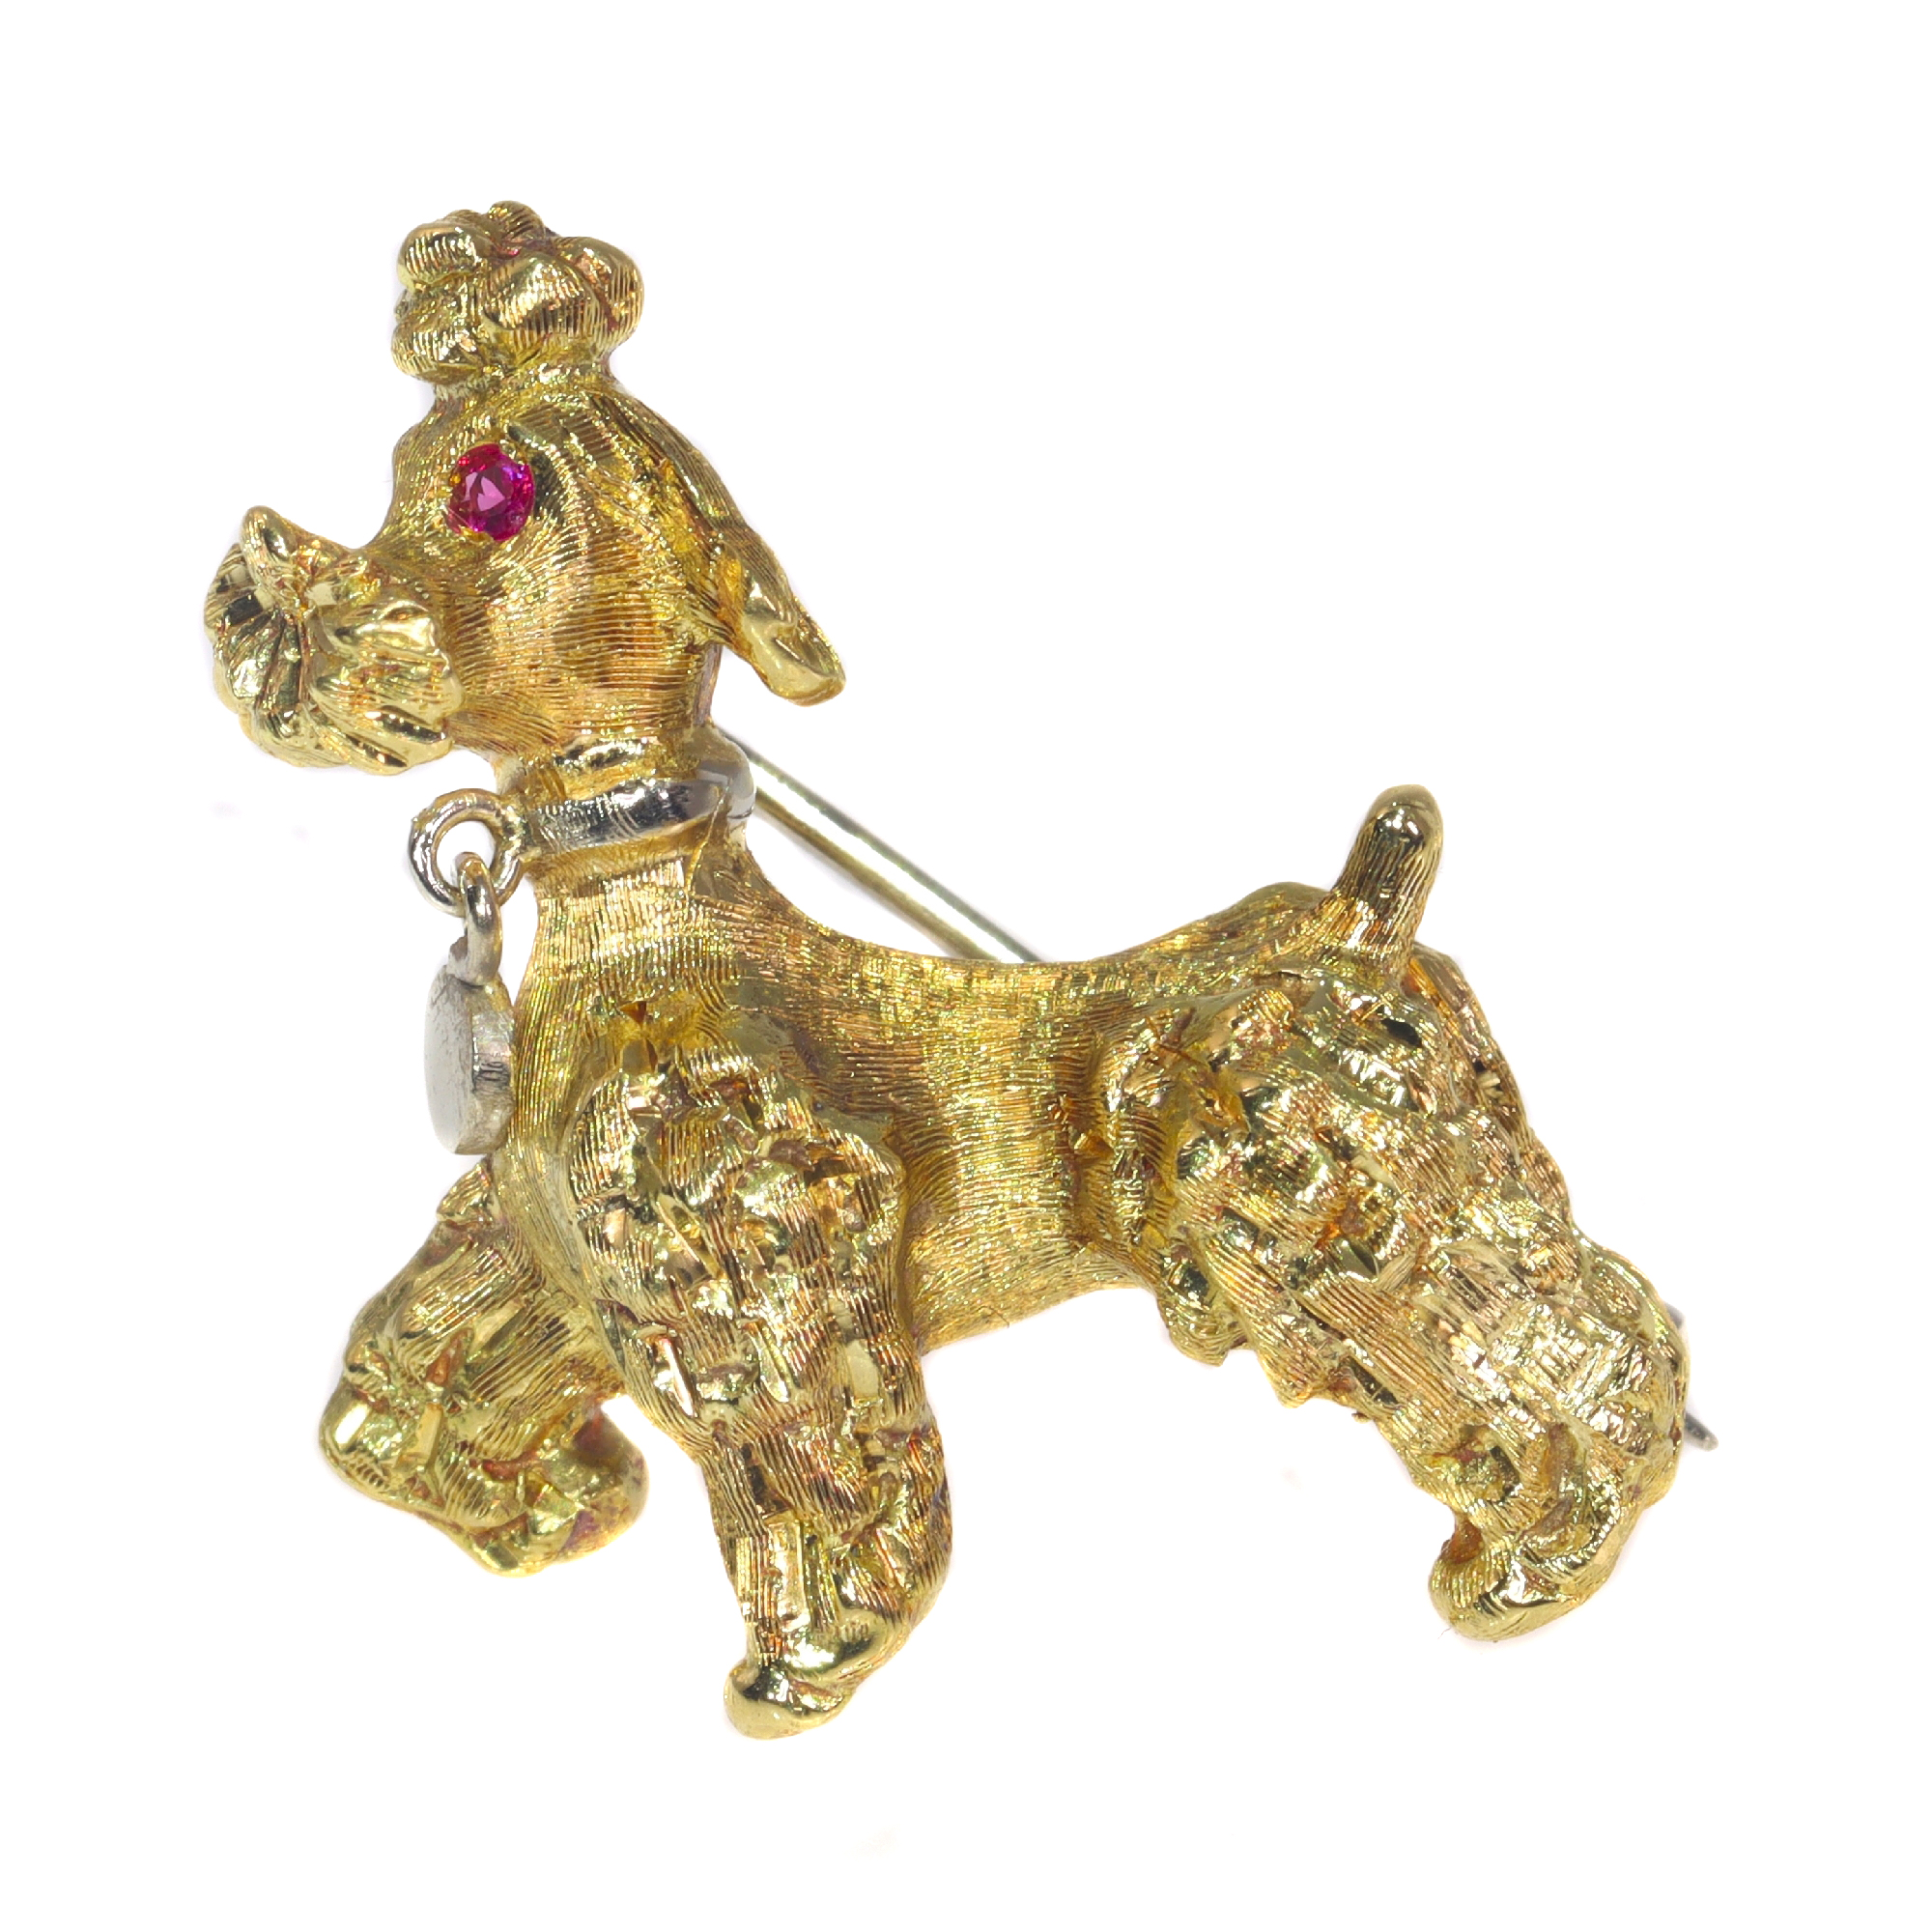 Vintage Fifties 18K yellow gold poodle brooch